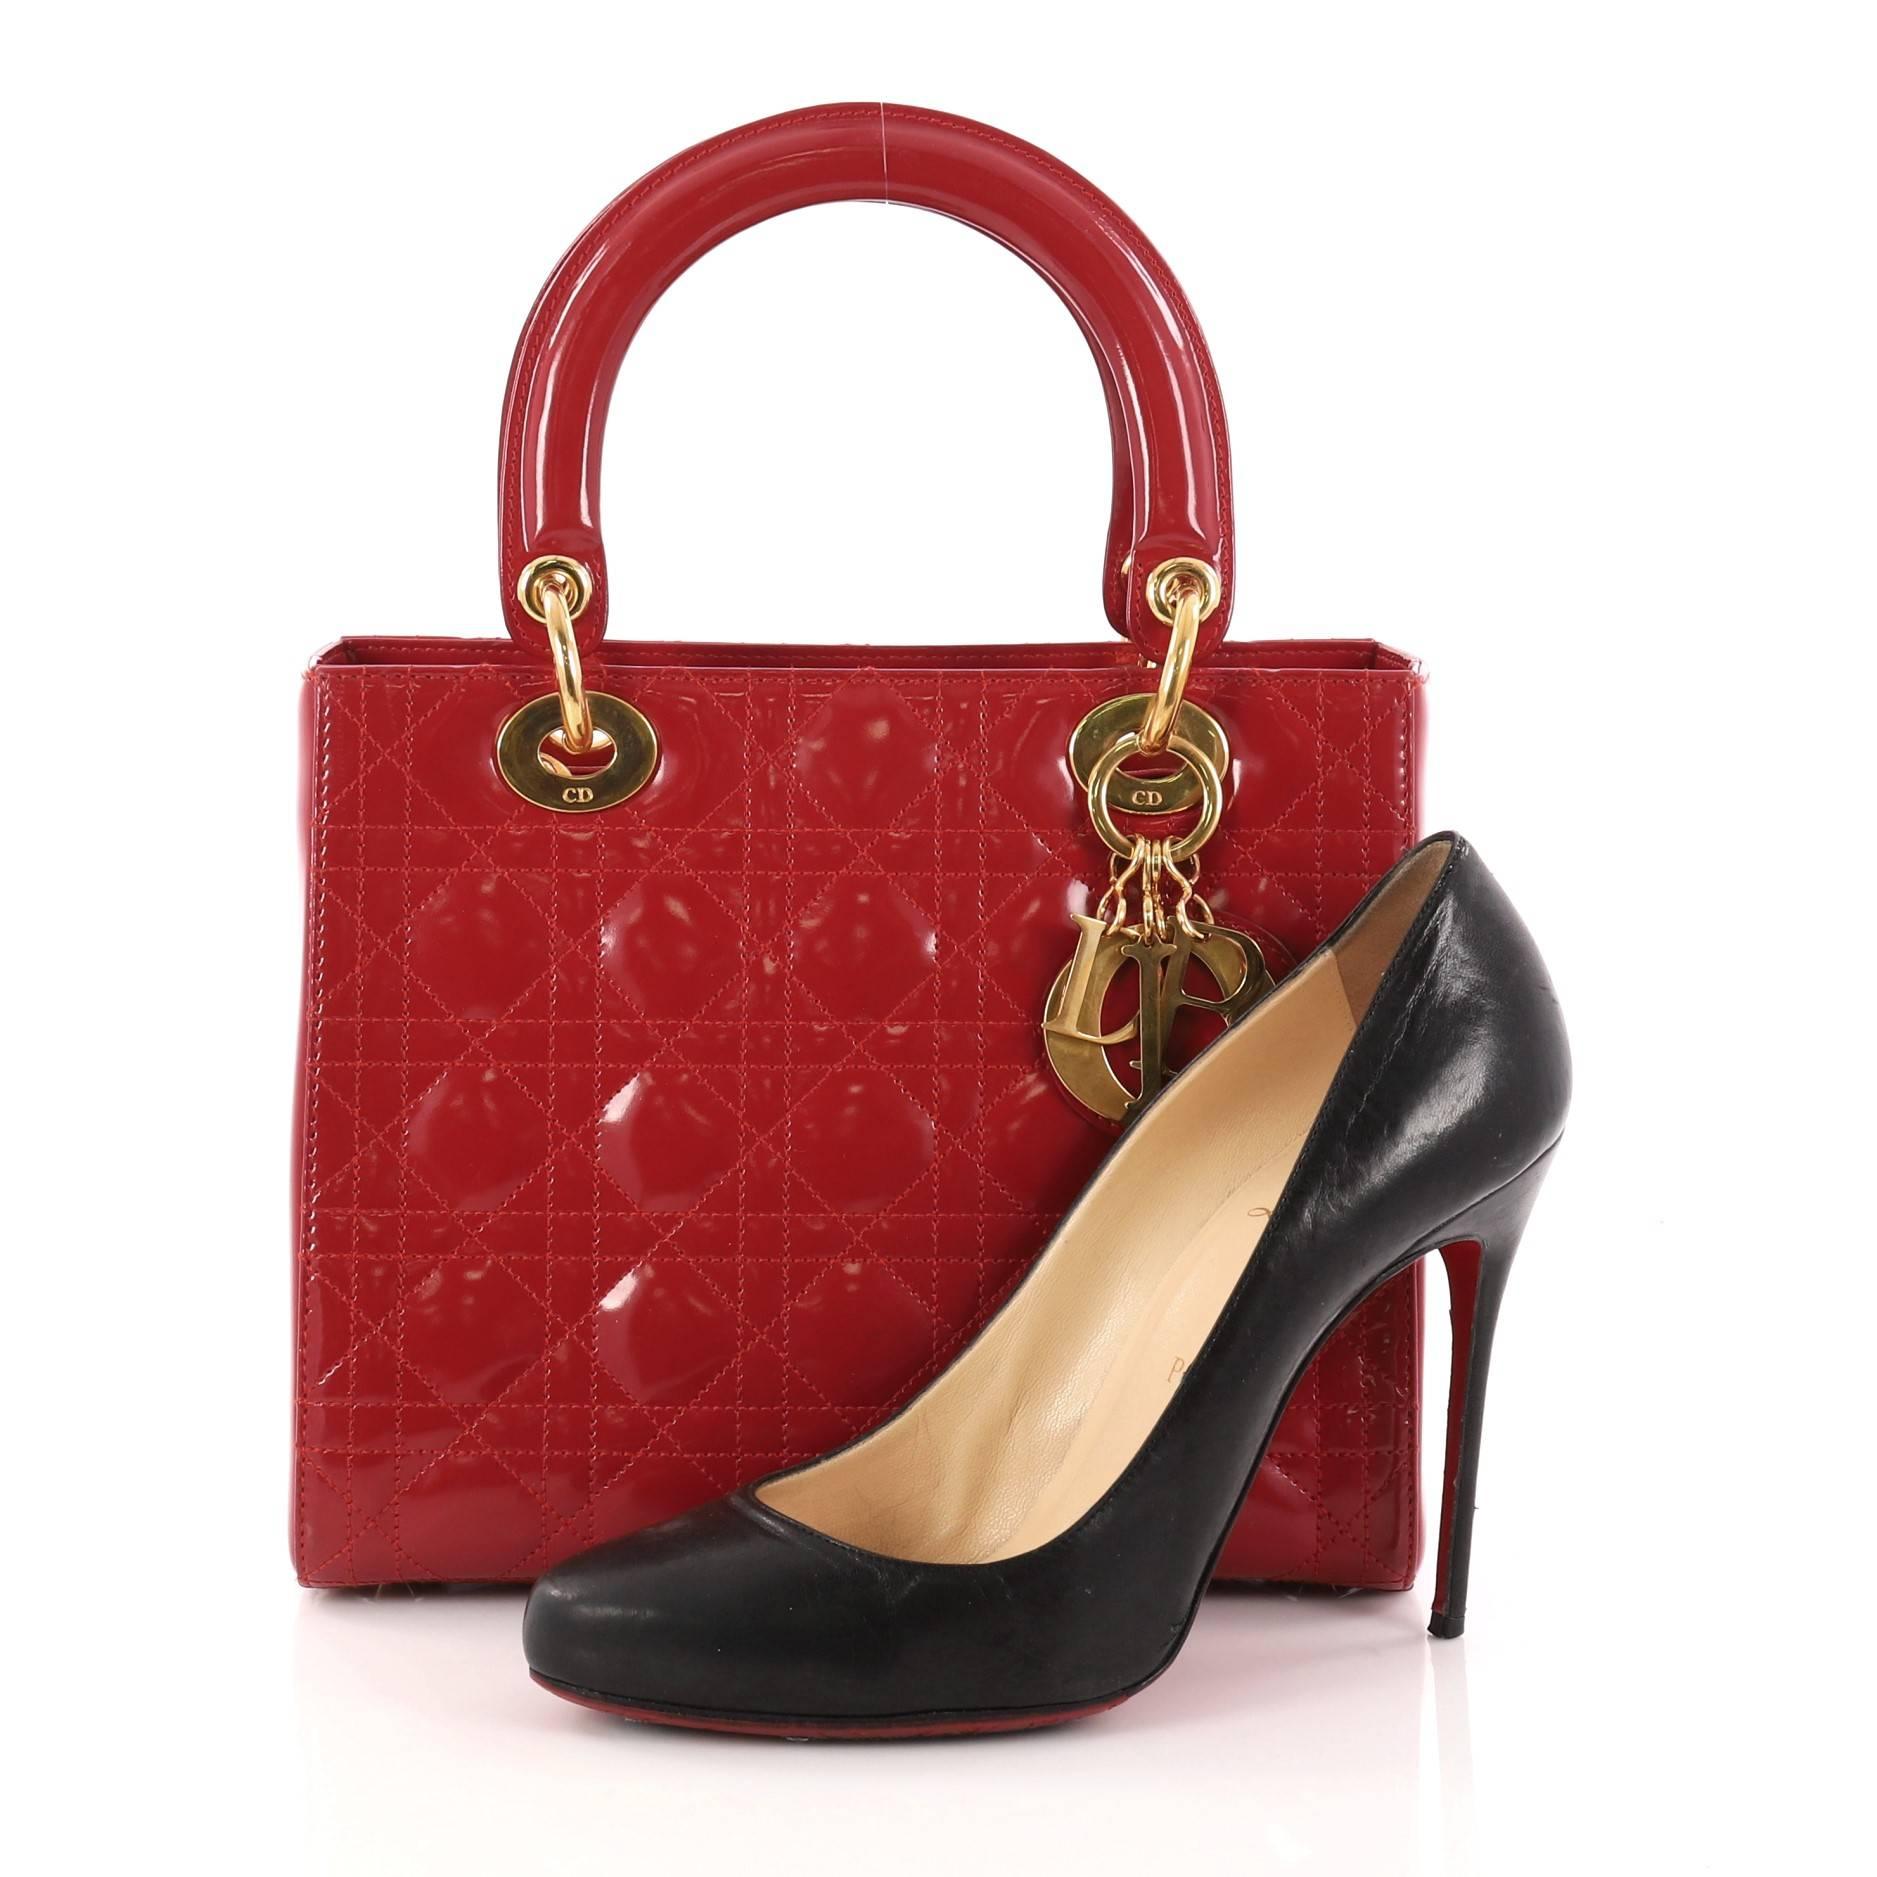 This authentic Christian Dior Lady Dior Handbag Cannage Quilt Patent Medium is a classic staple that every fashionista needs in her wardrobe. Crafted from red patent leather in Dior's iconic cannage quilting, this boxy bag features dual-rolled